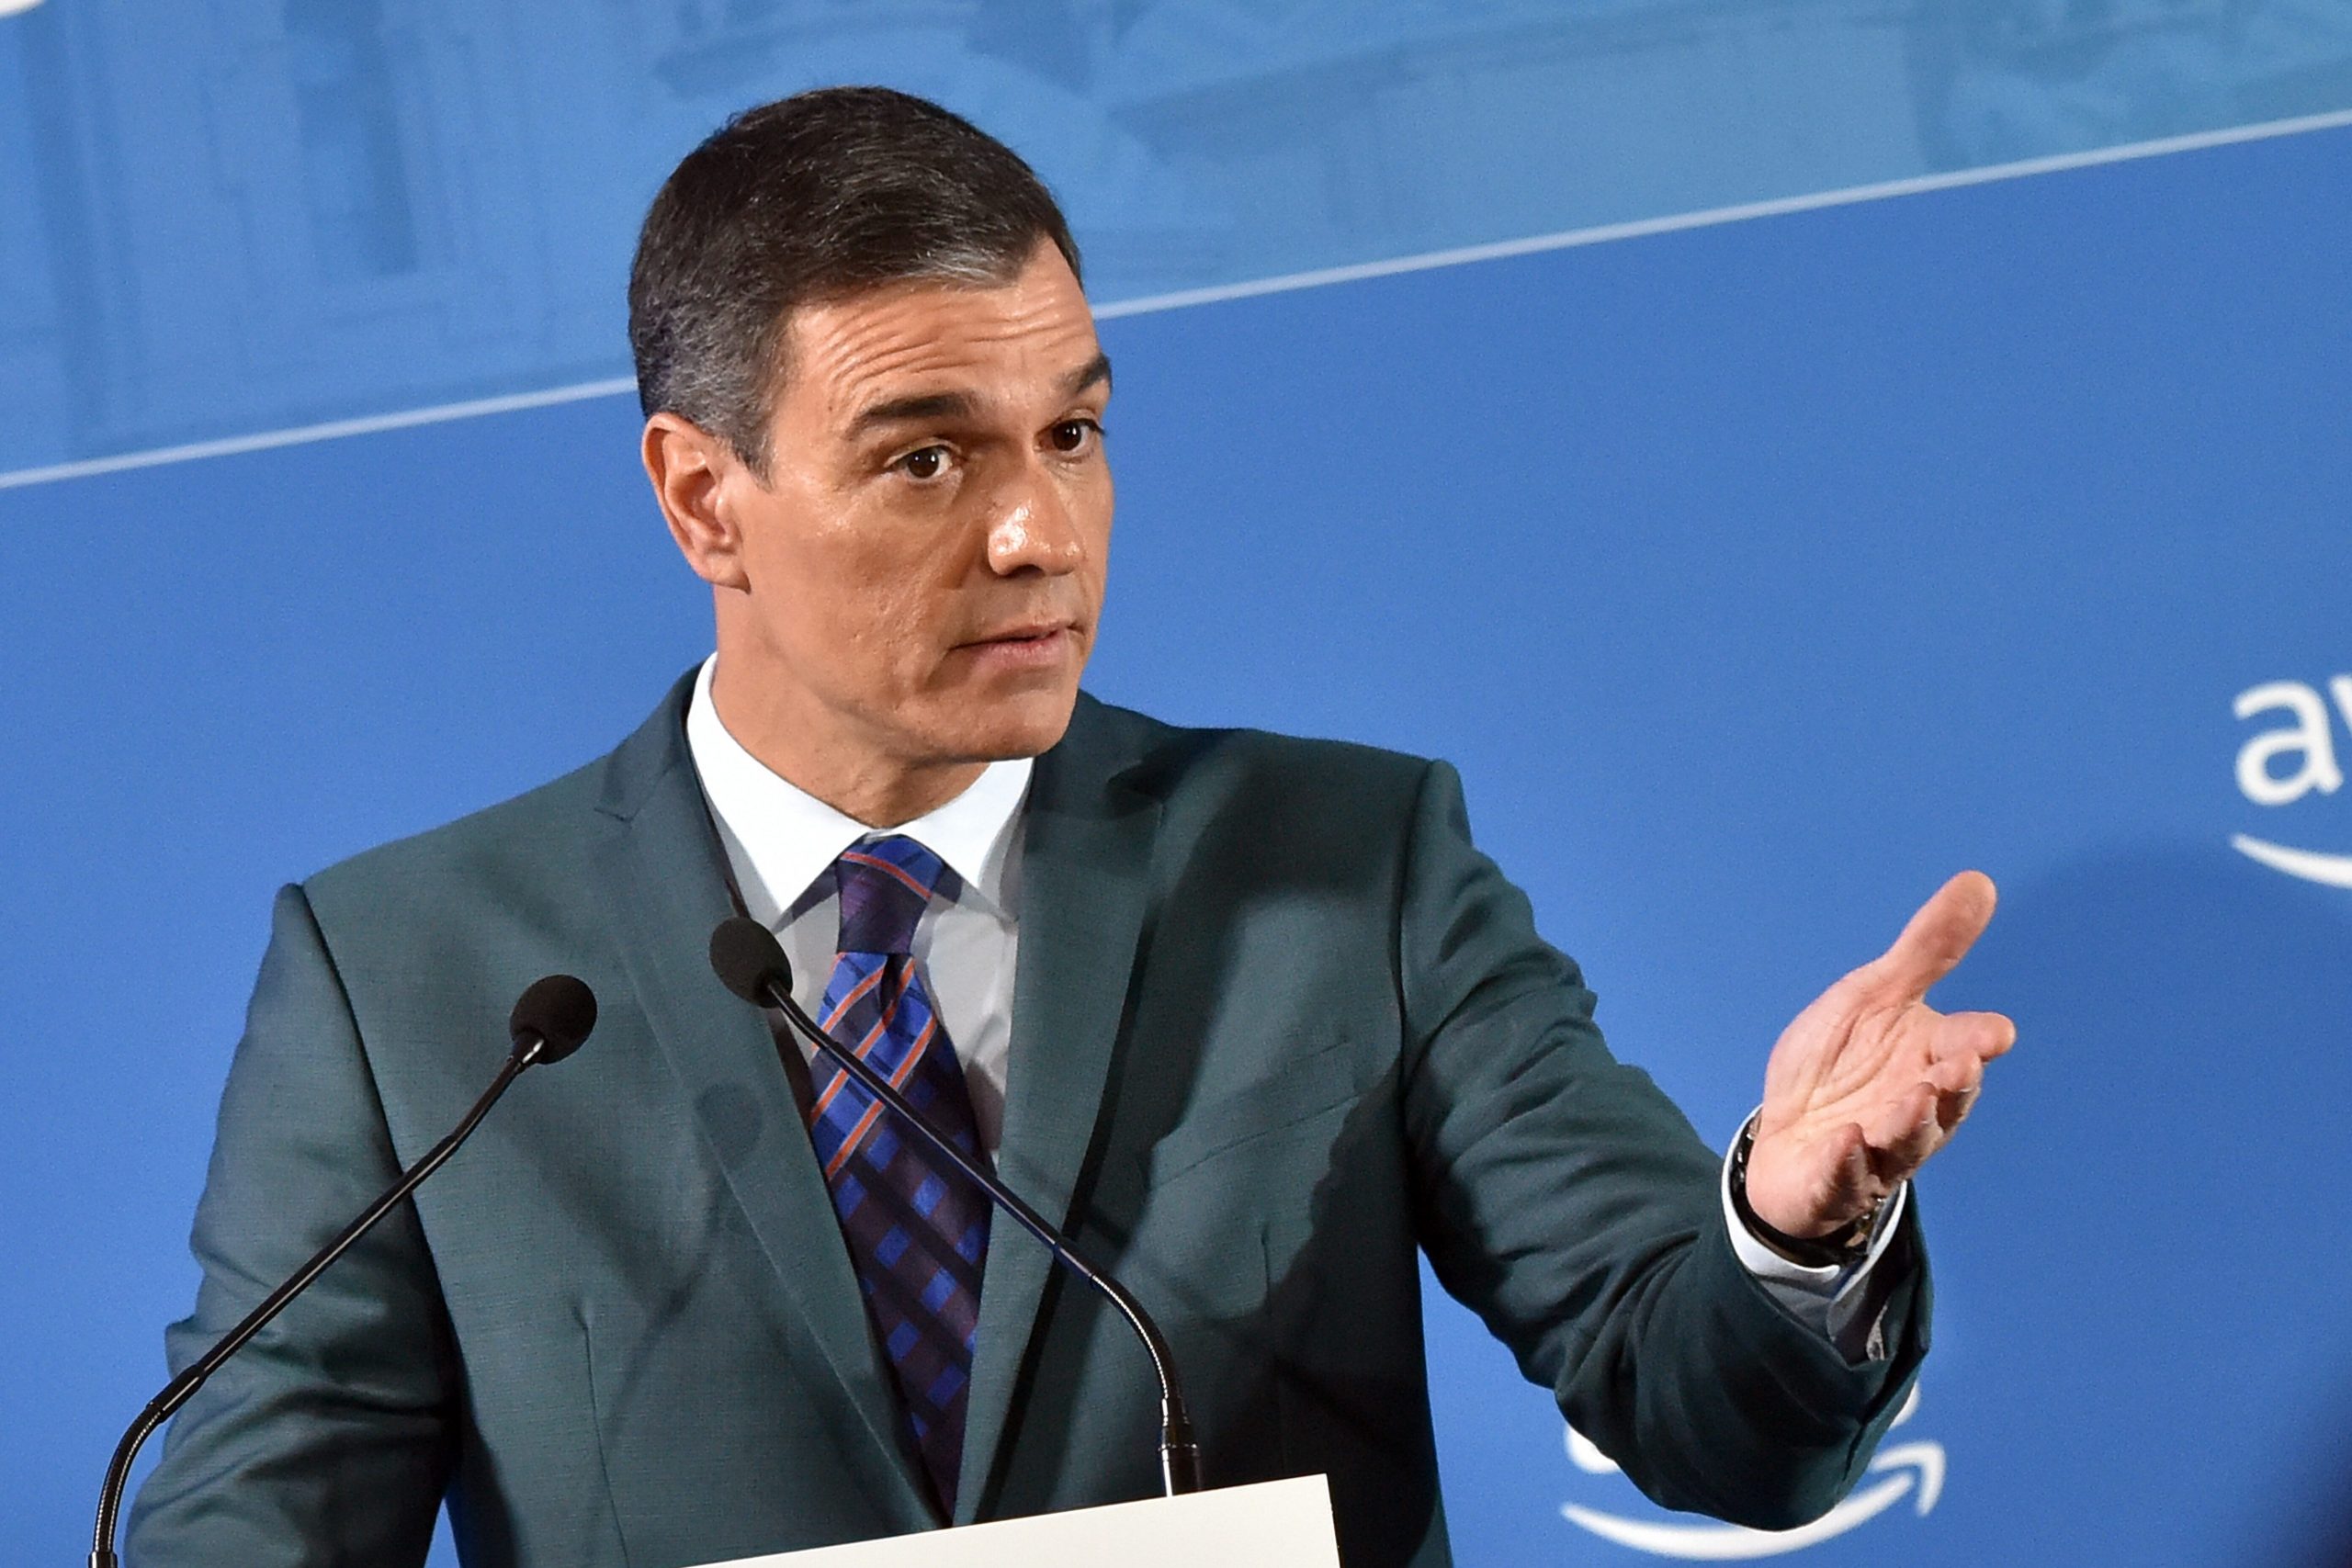 Pedro Sánchez says that the judicial veto on the appointments of judges is 